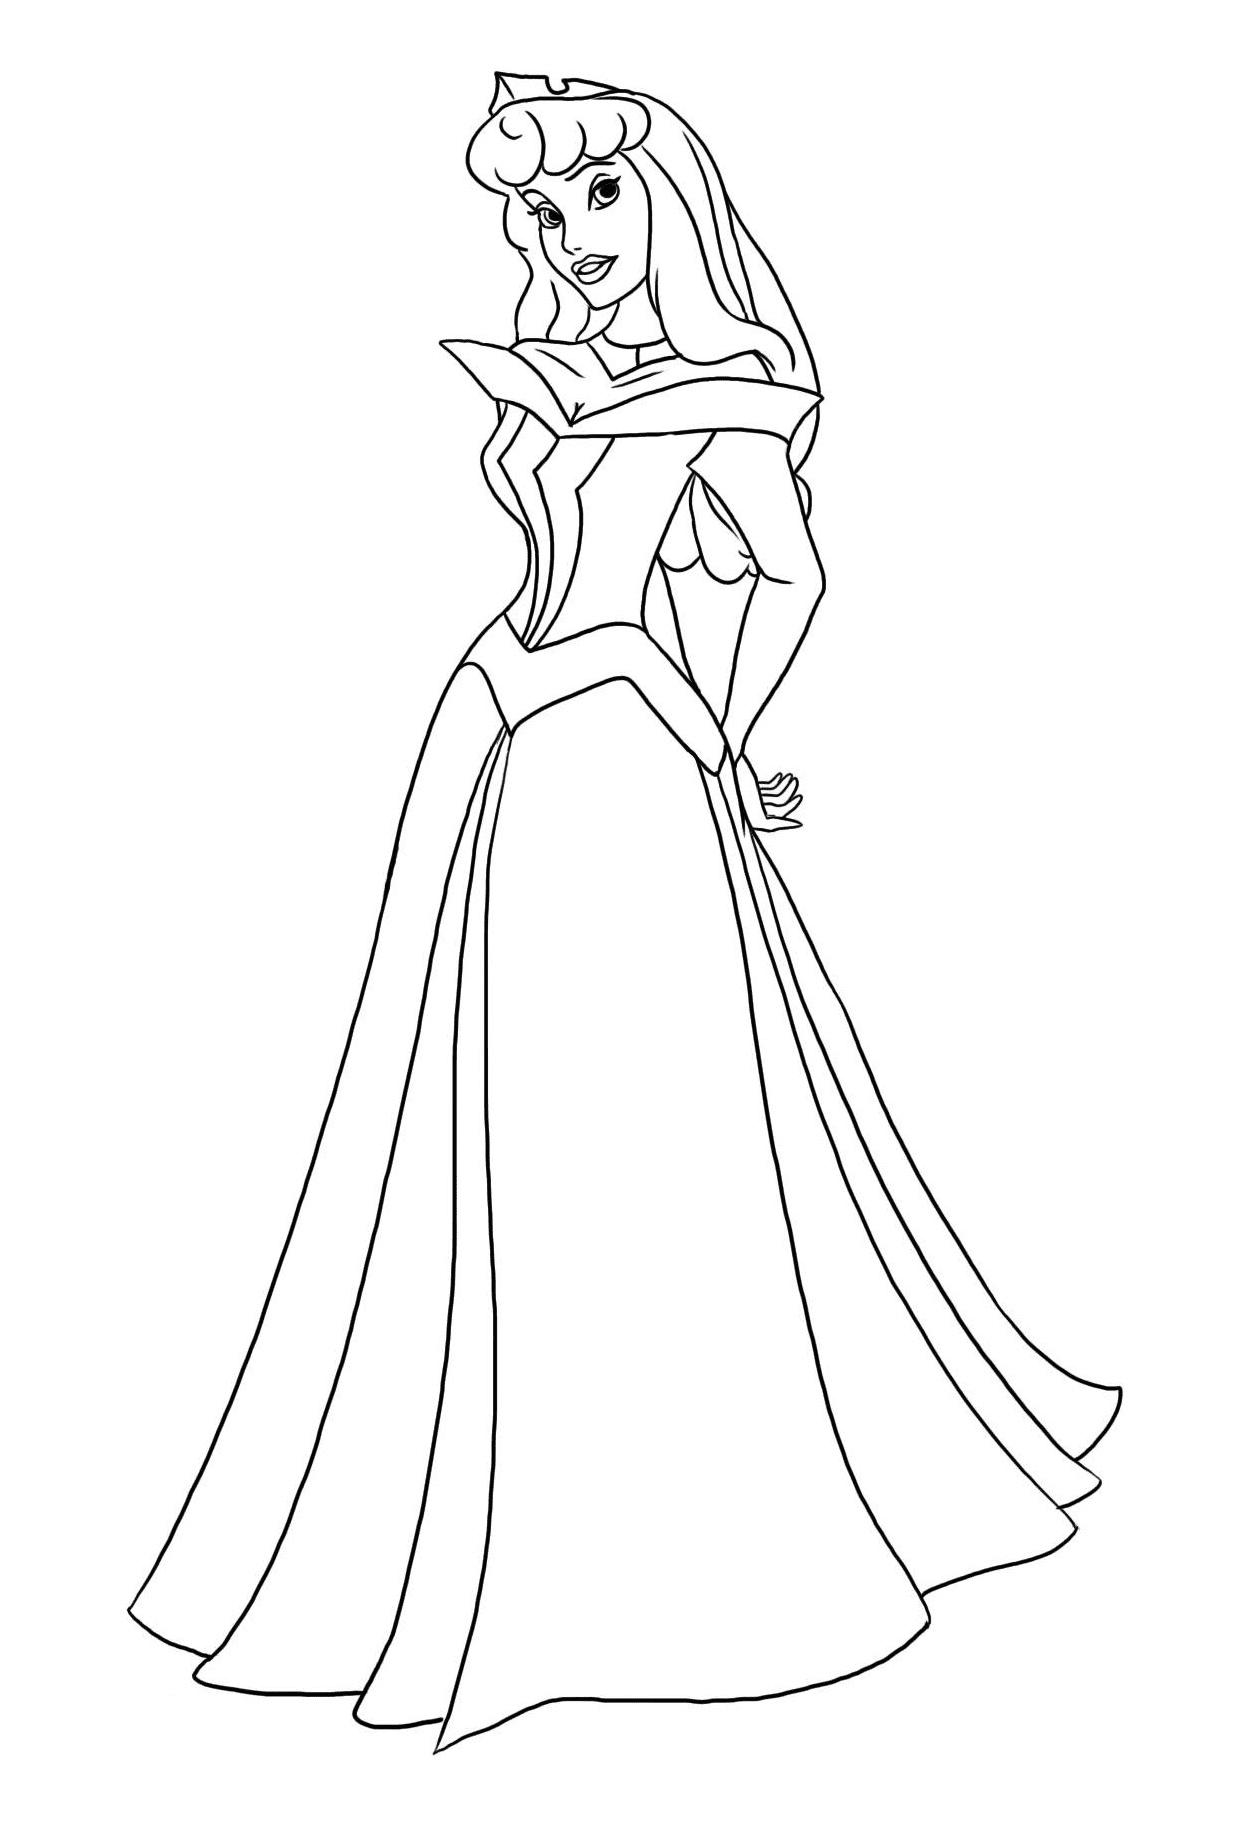 Sleeping Beauty to Print Coloring Page